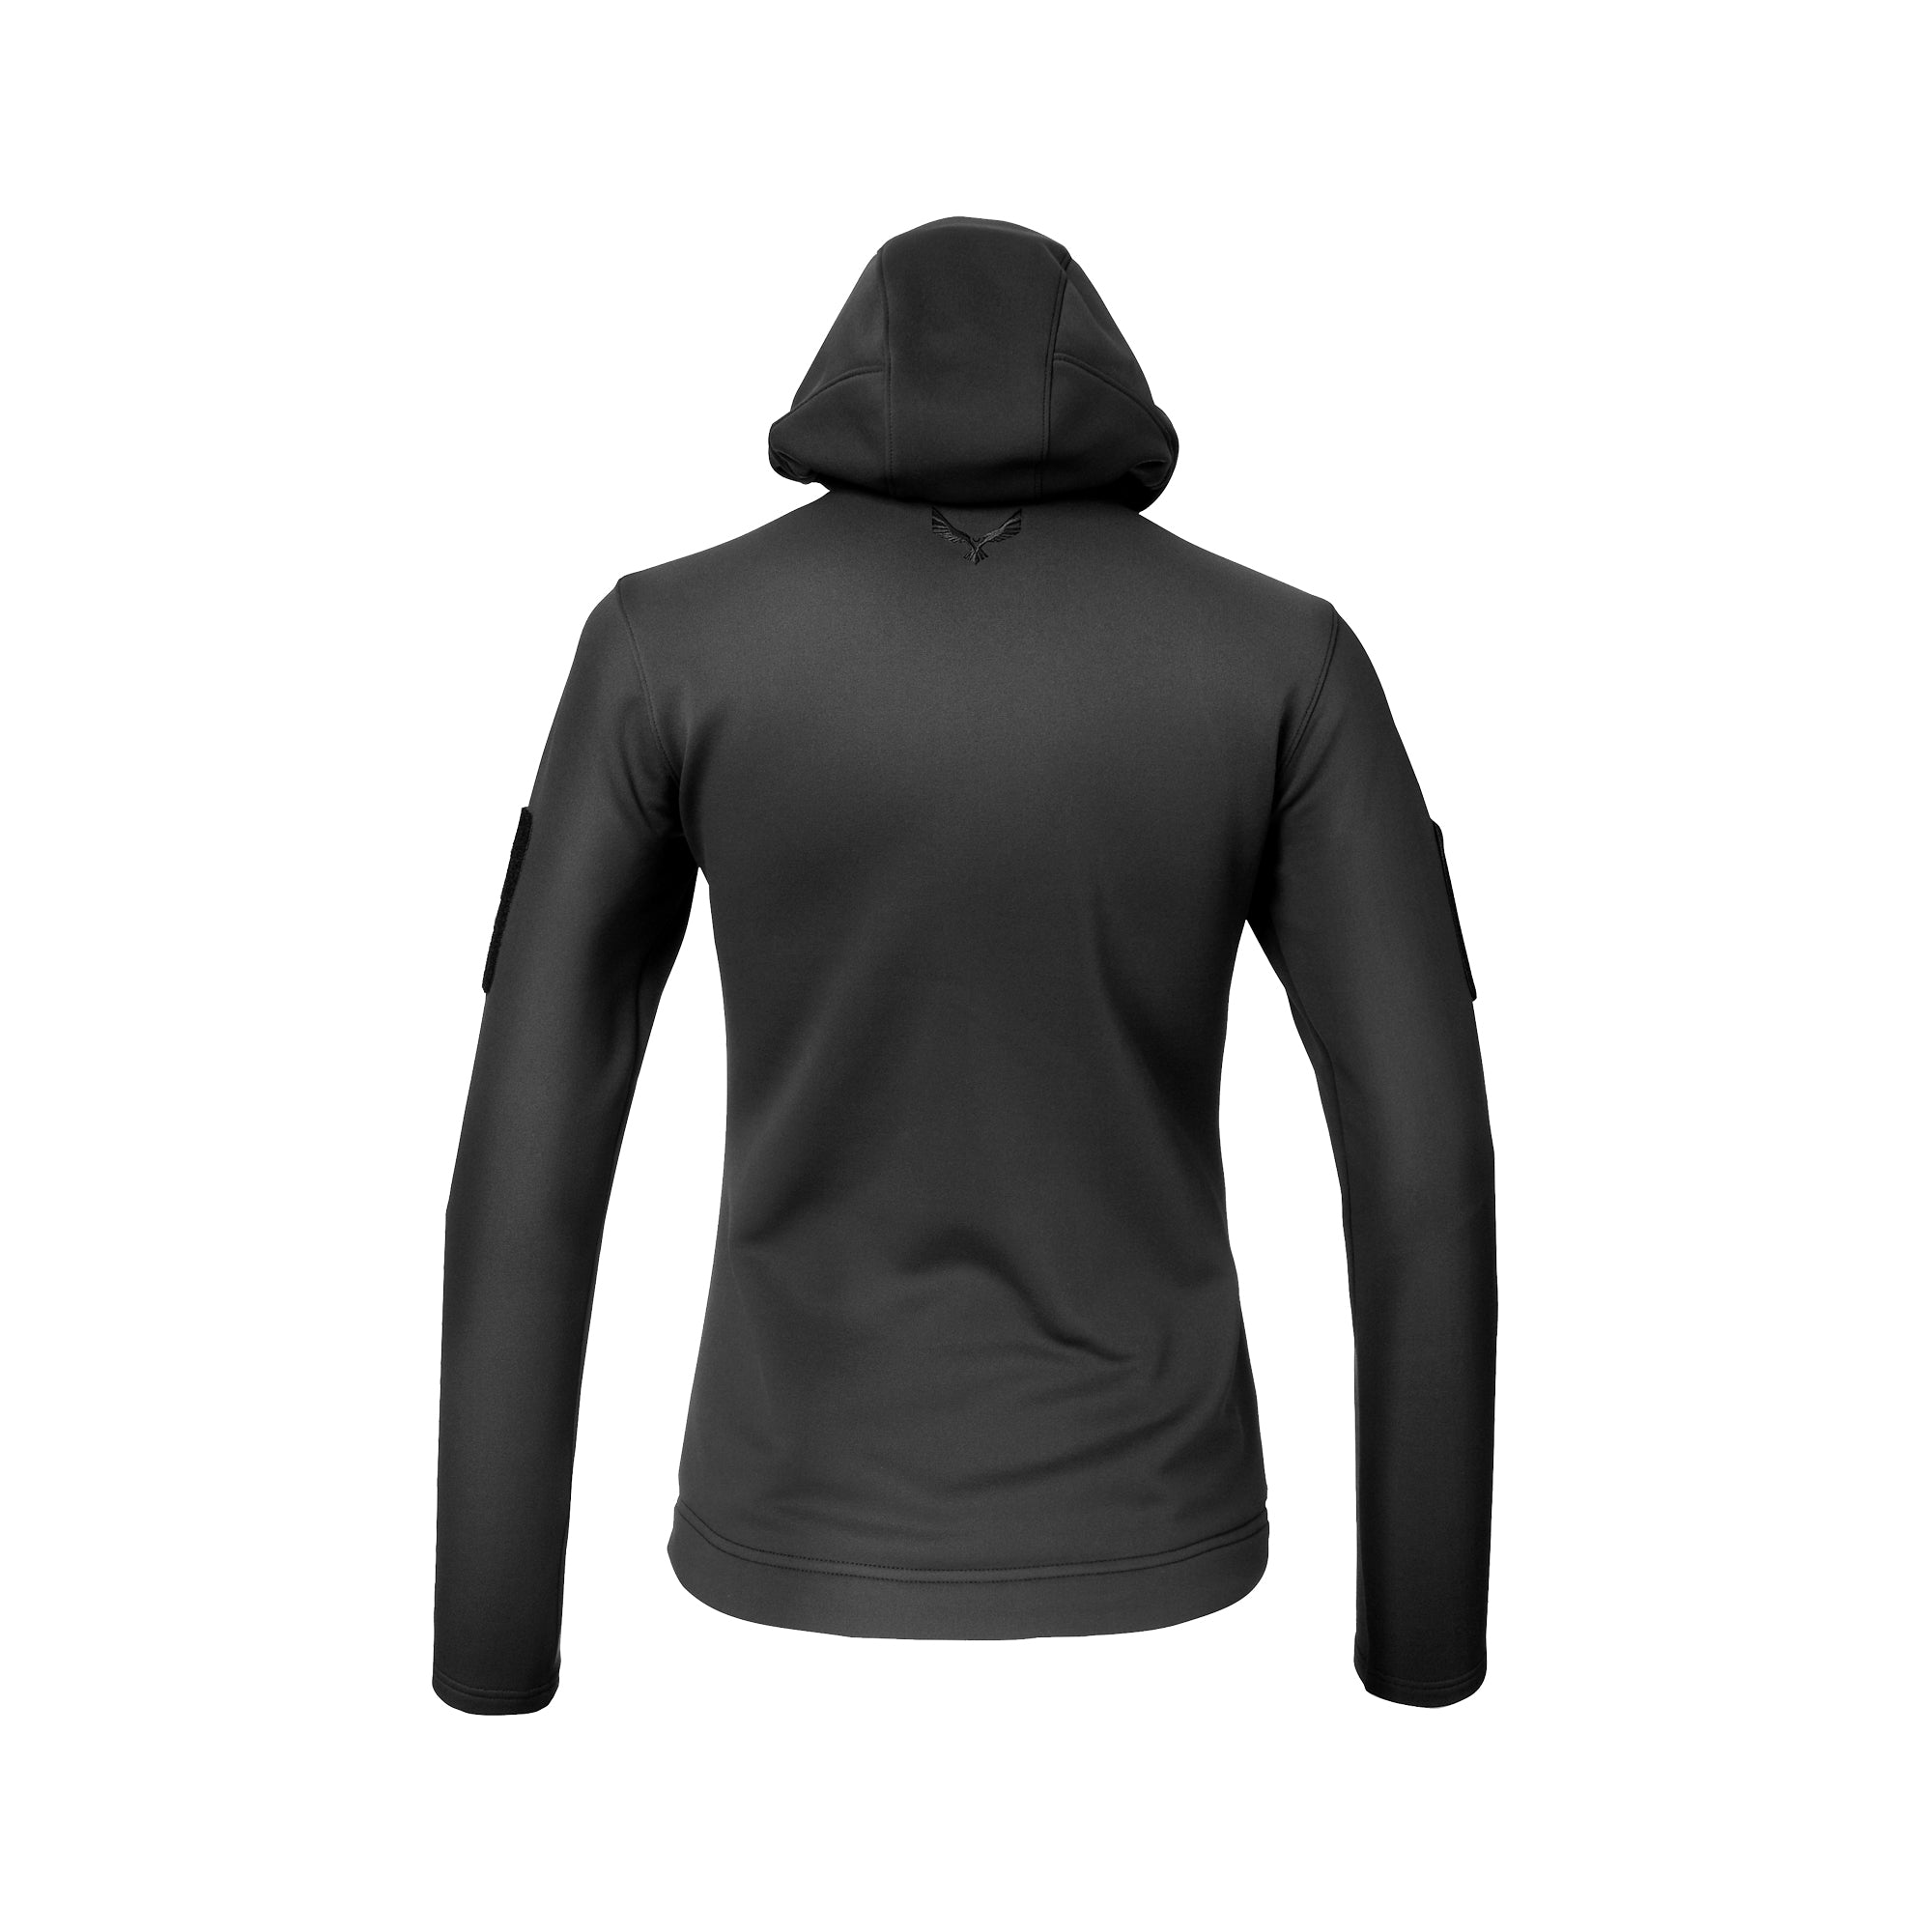 Helios hoodie Jacket -- for Tactical Teams, Outdoors , Athletes